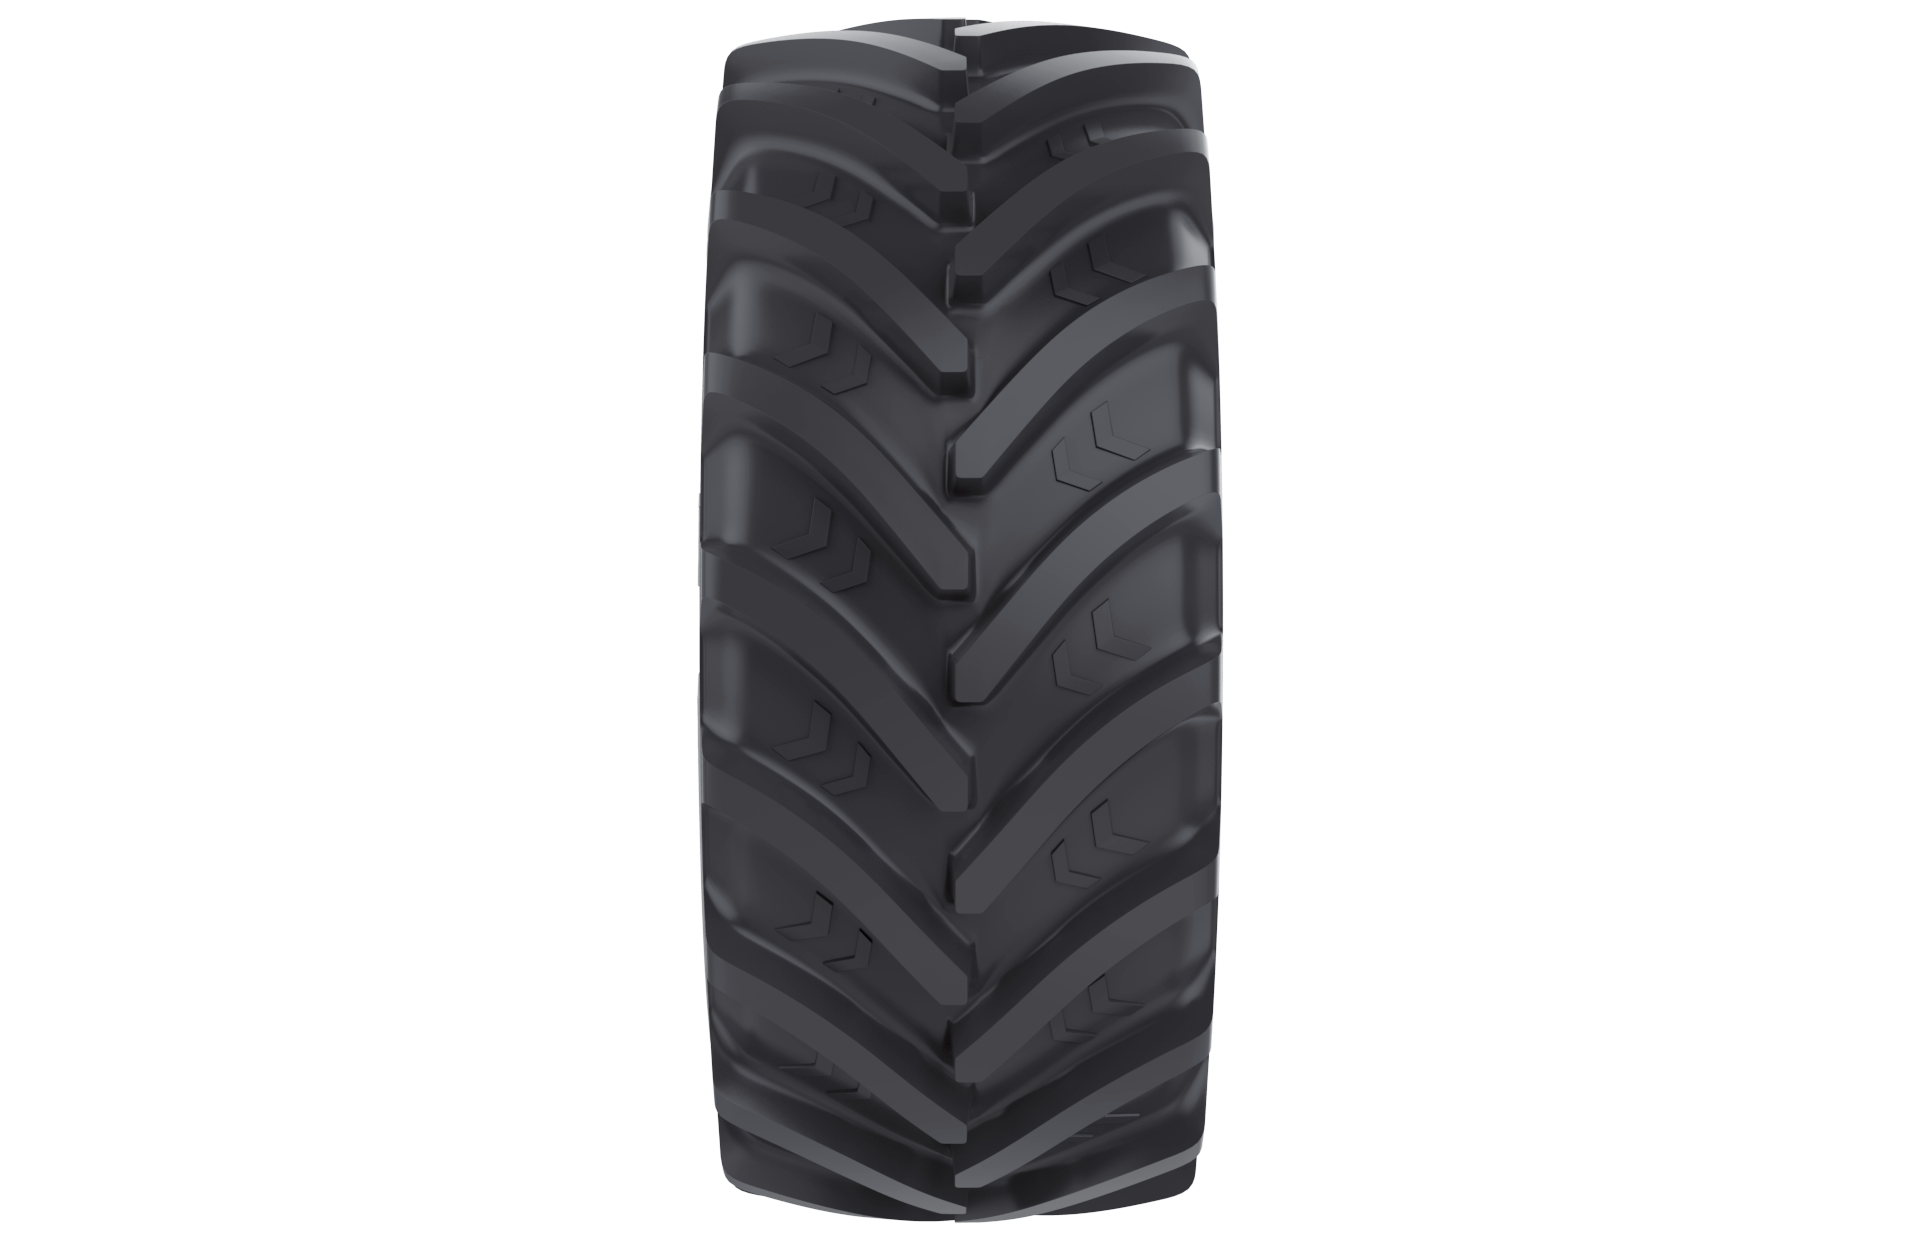 ASCENSO VF 600/60R30 NRO 162D R1-W TL VDR2000 STEEL BELTED